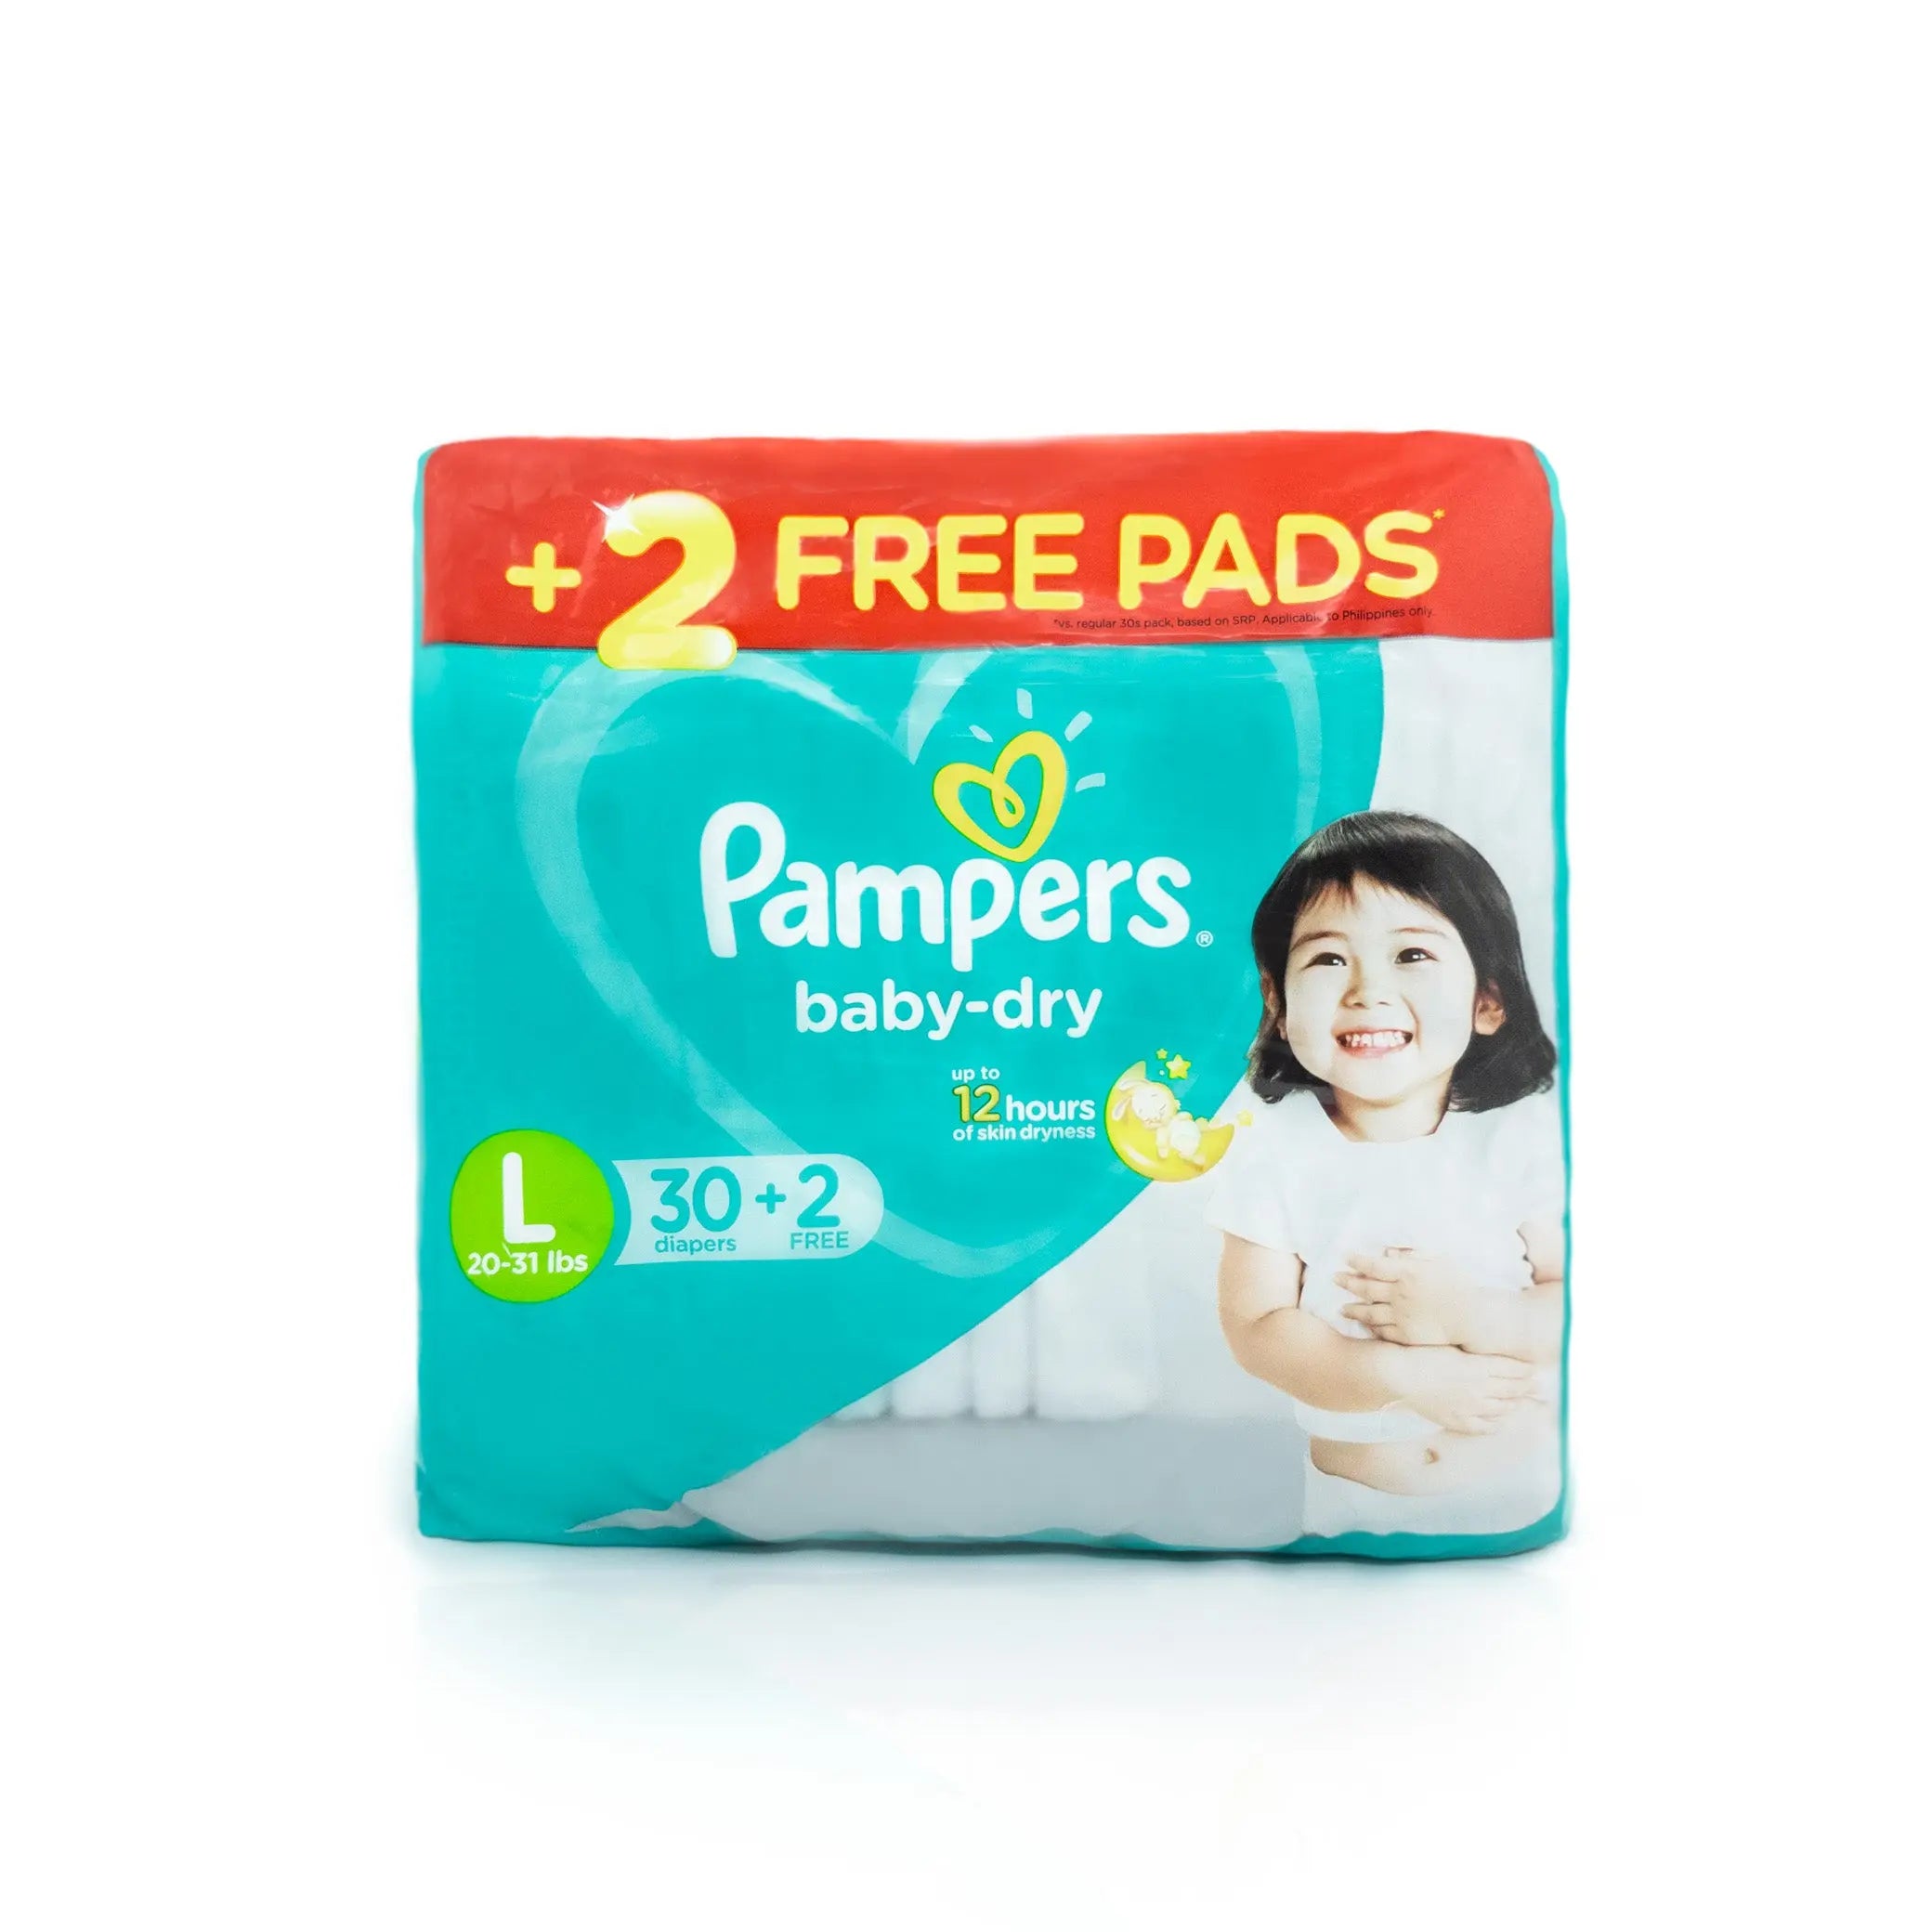 Buy Pampers Pants M 4pads Online at Low Prices in India - Paytmmall.com